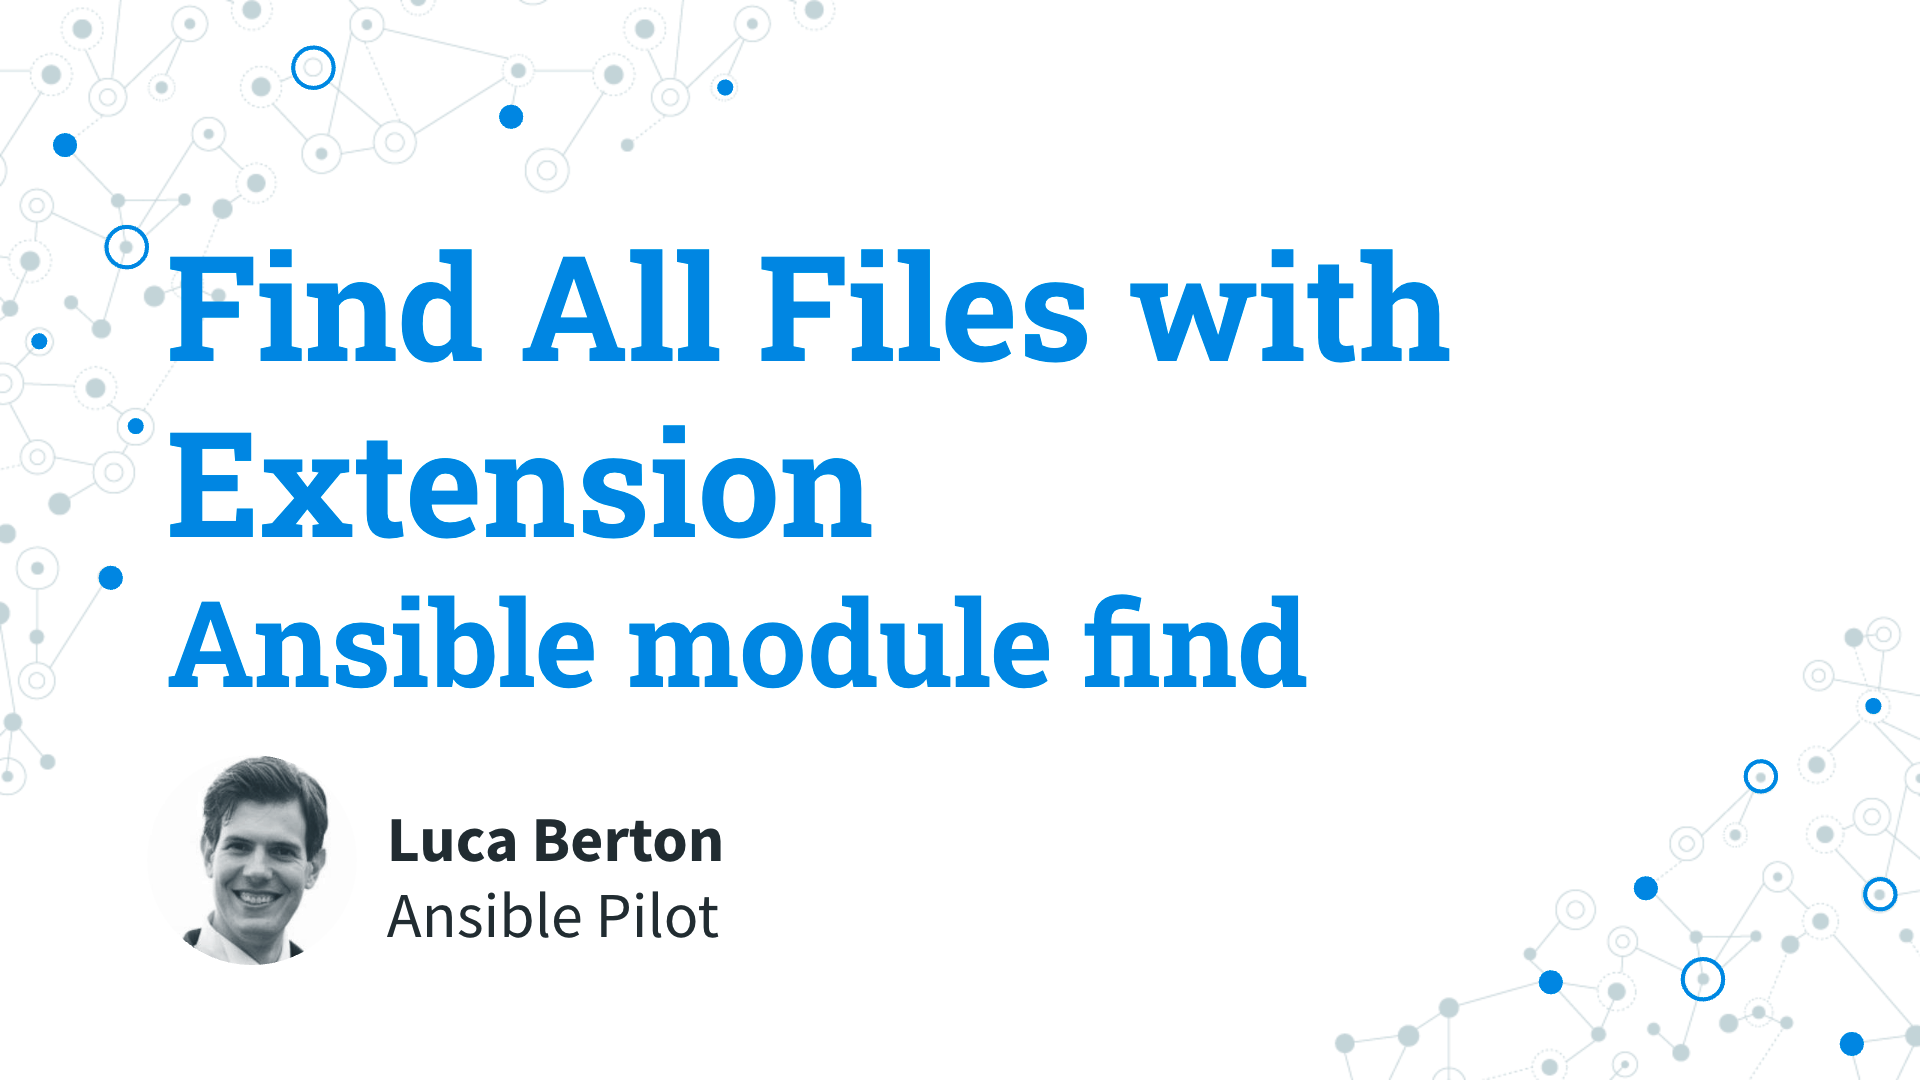 Find All Files with Extension - Ansible module find